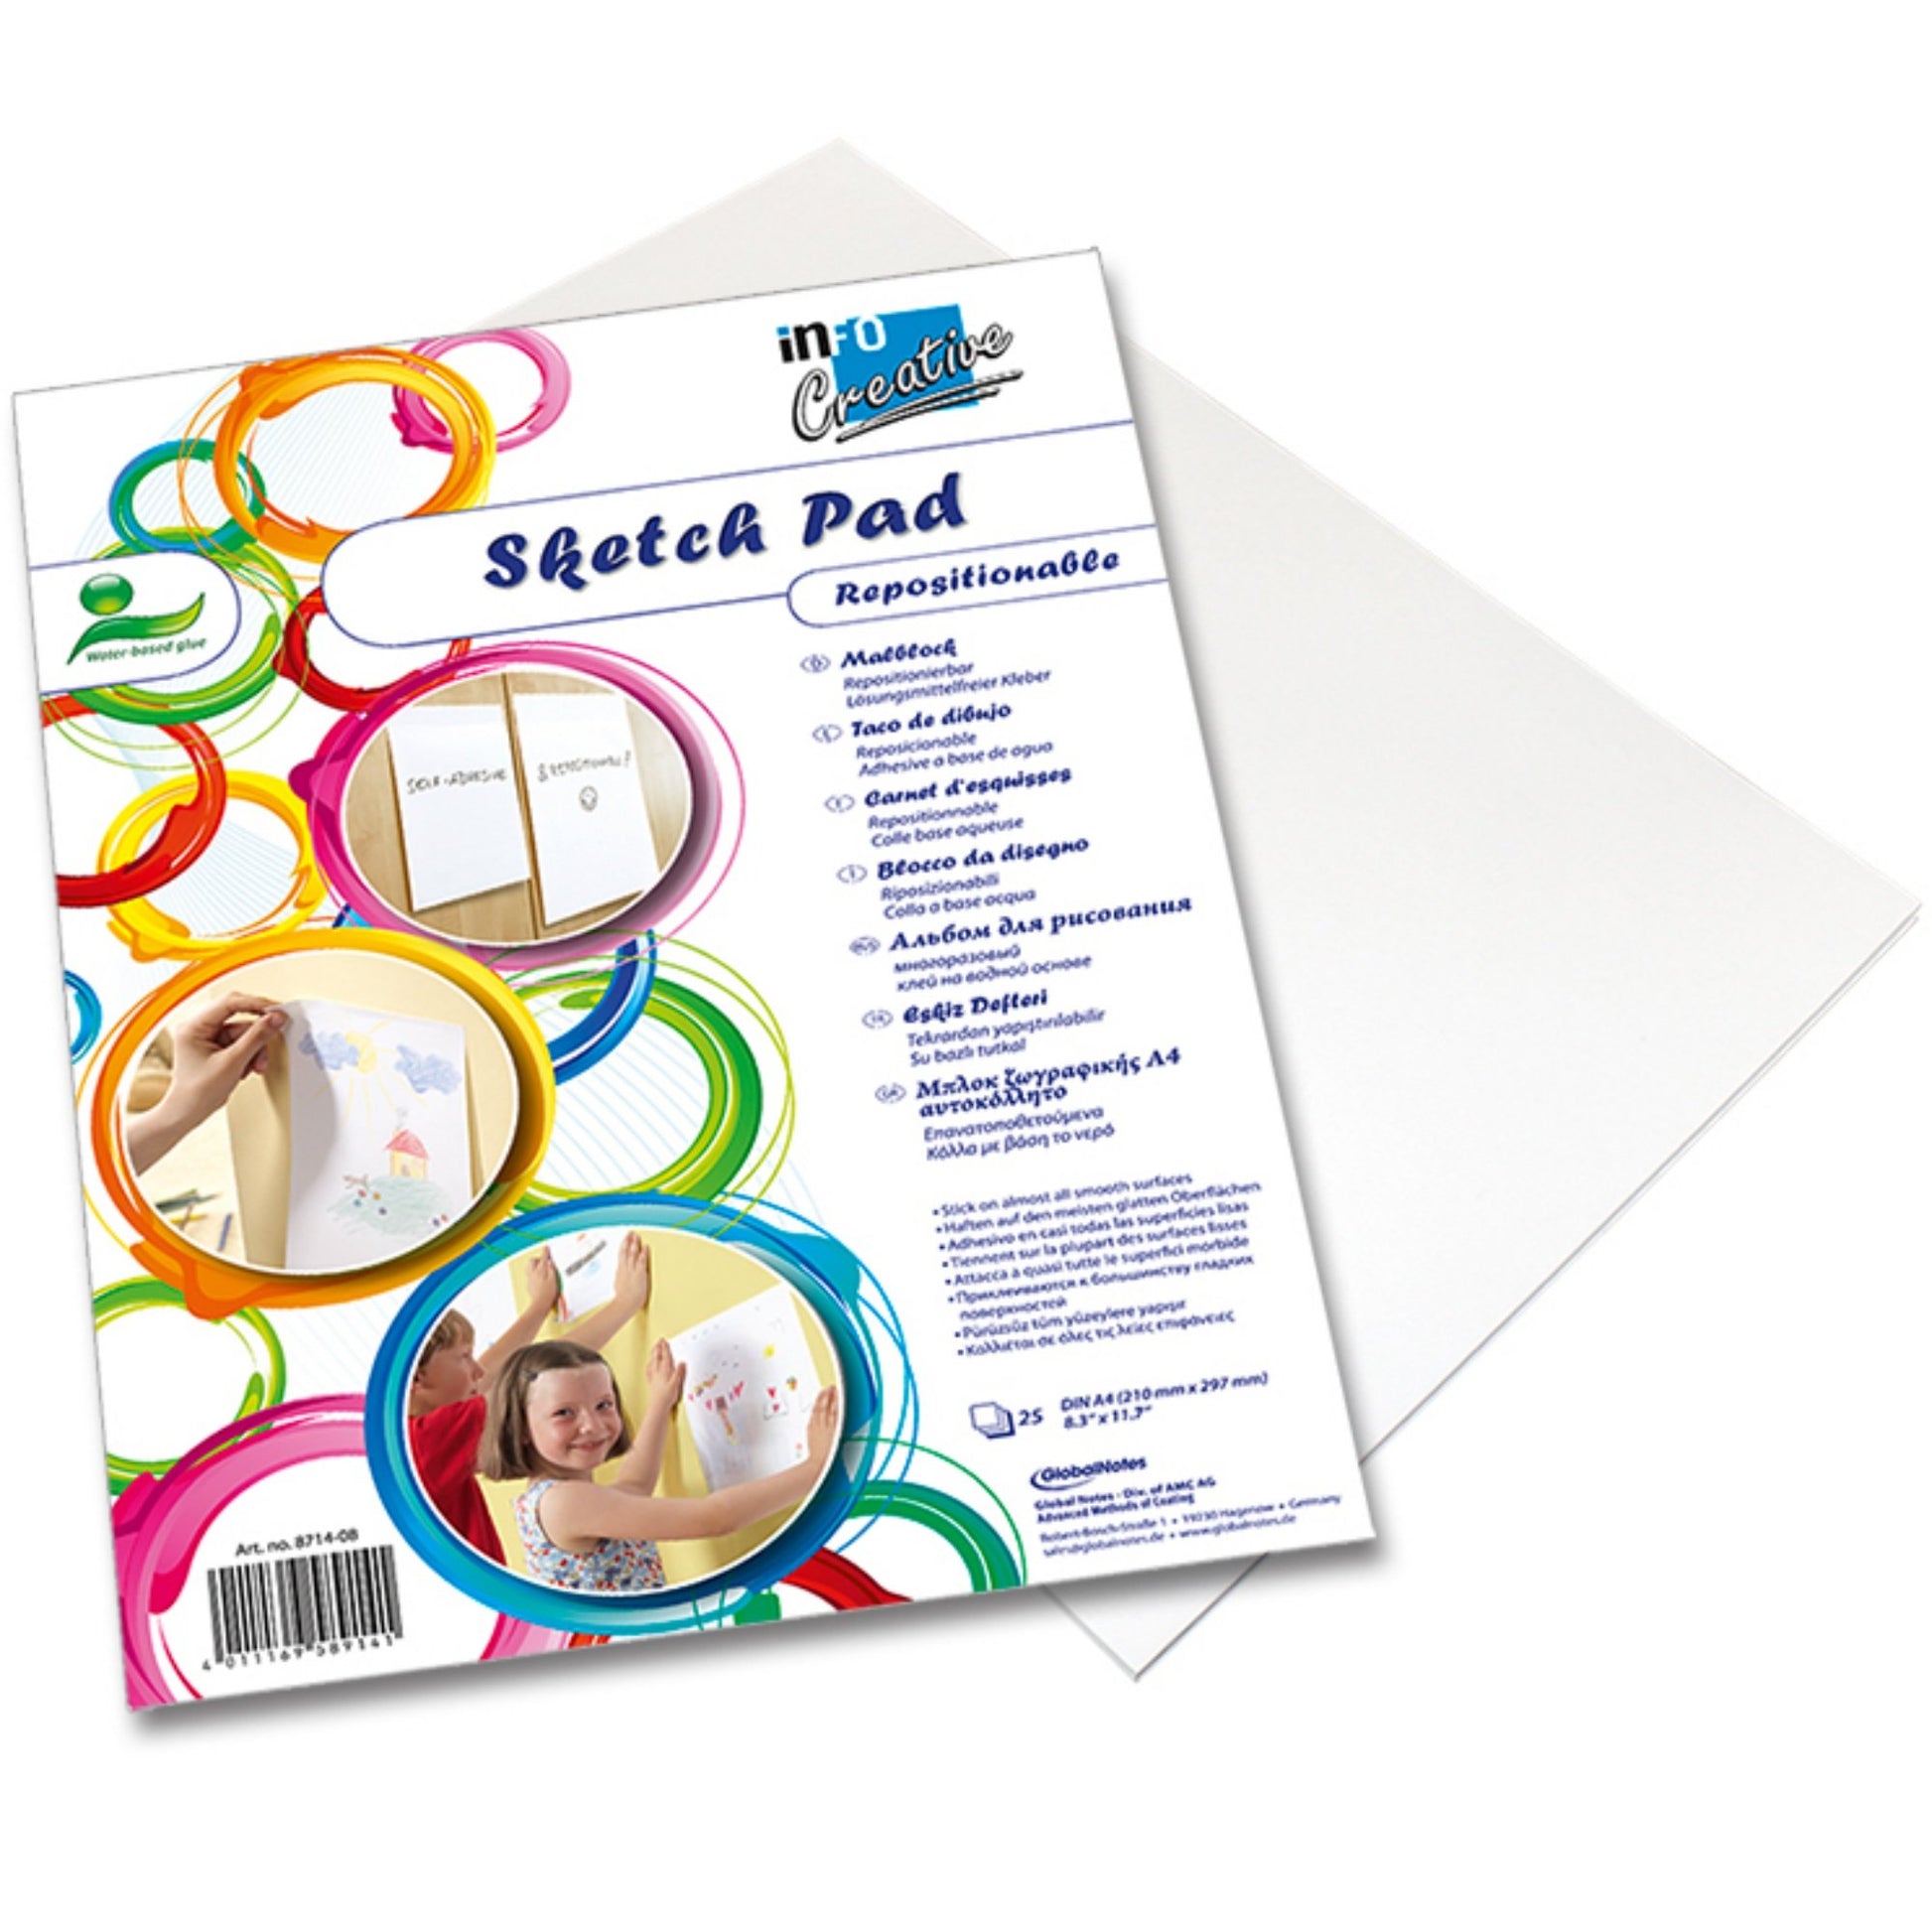 Bienfang Giant Drawing Paper Pad - 11 inch x 14 inch, 50 Sheets